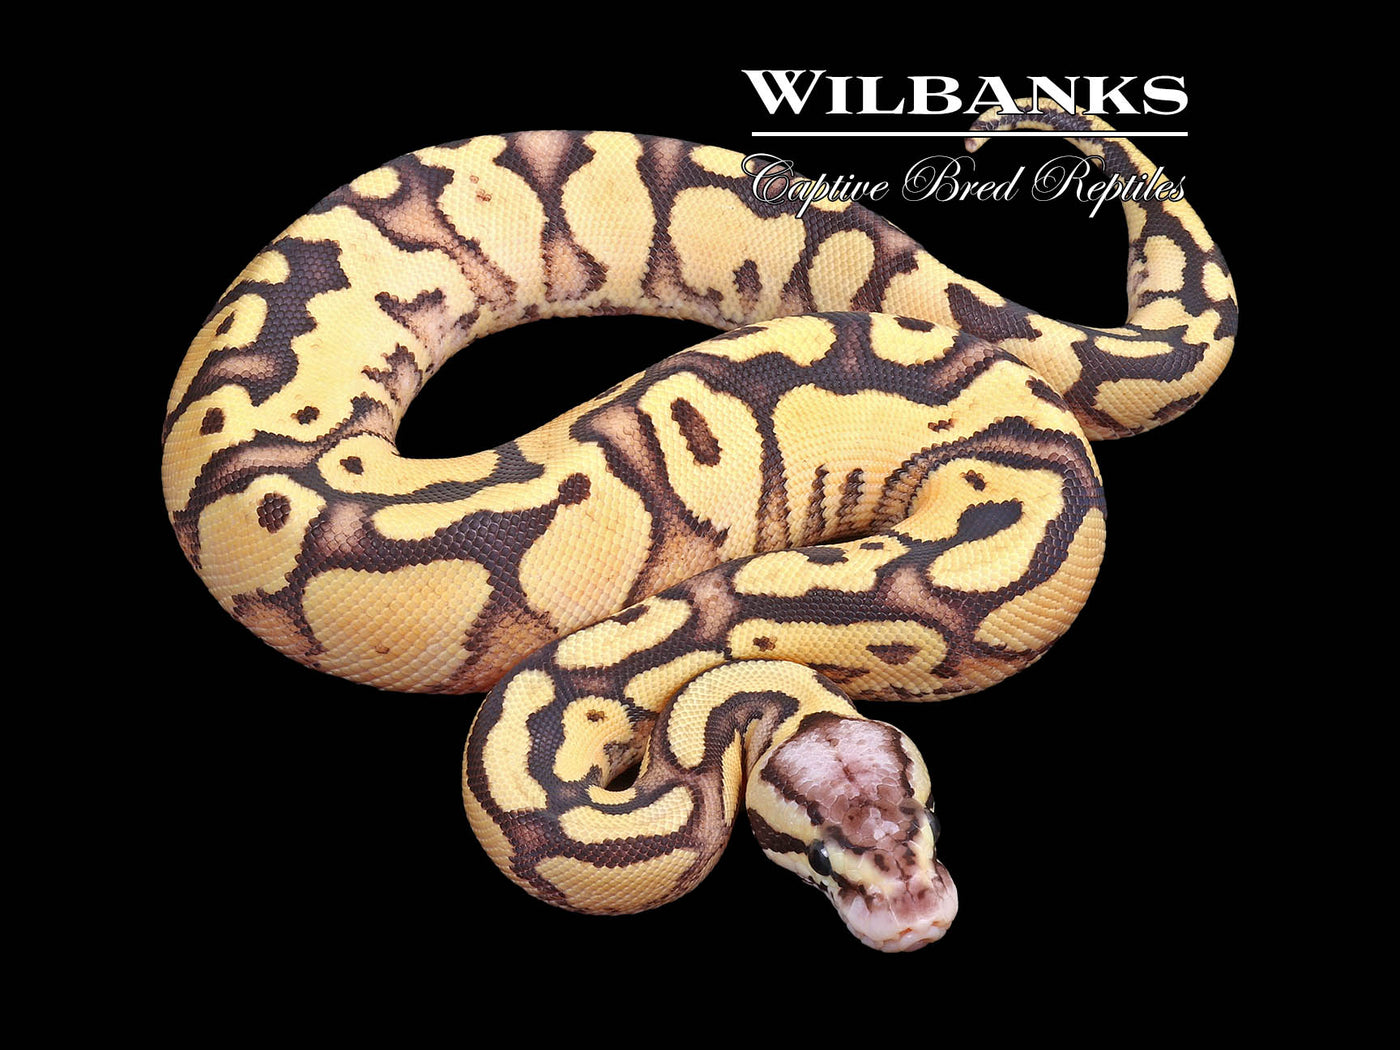 Firefly Yellow Belly or Gravel Ball Python ♀ '23